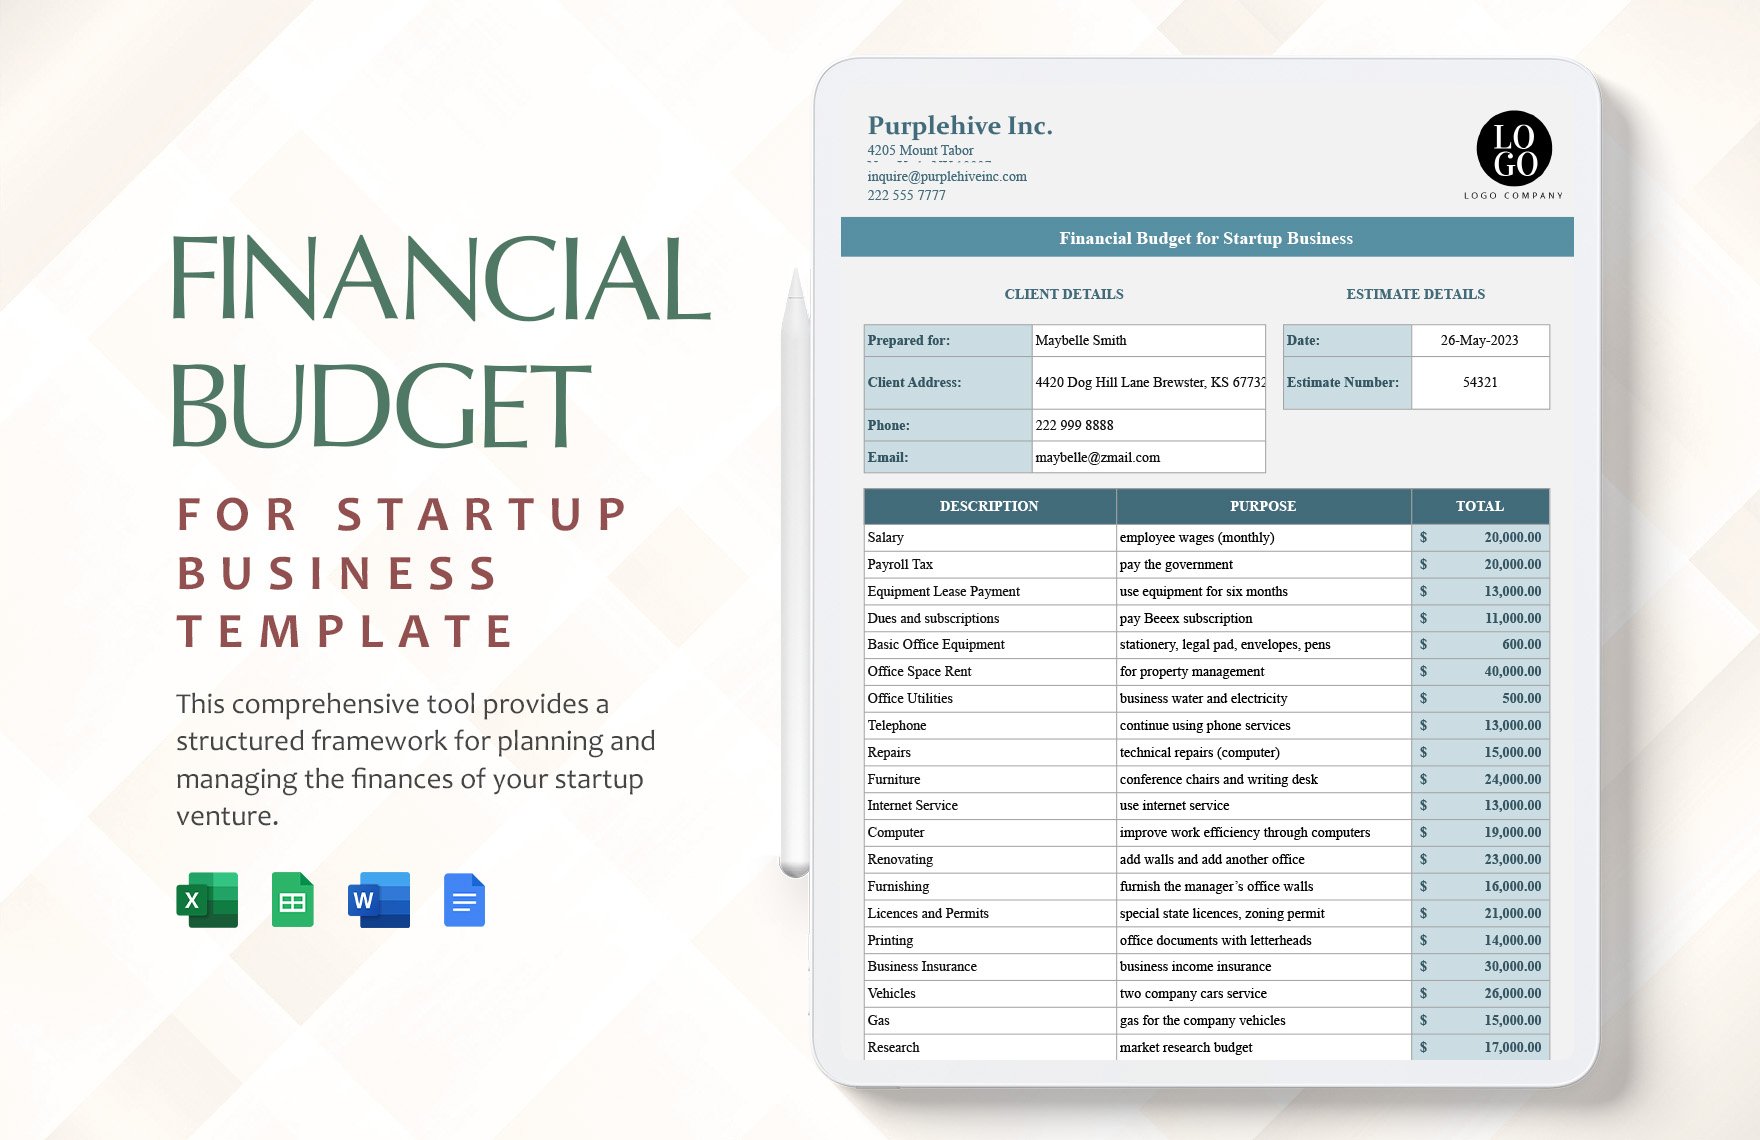 Financial Budget for Startup Business Template